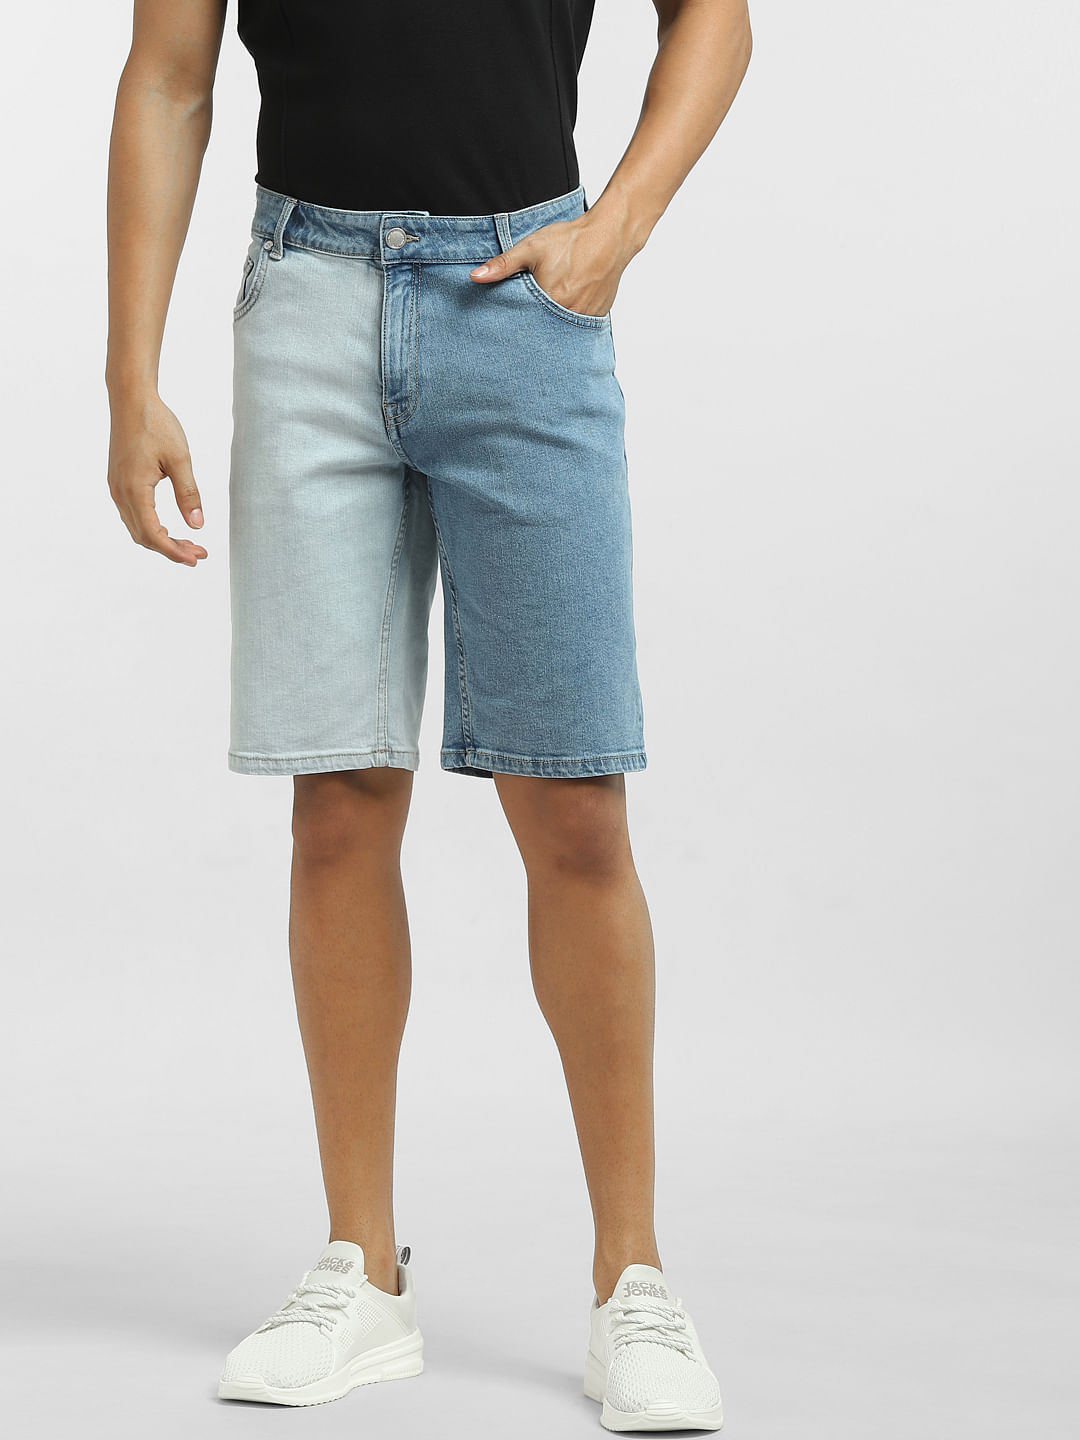 Buy POTO Women's Denim Shorts High Waisted Wide Leg Jeans Shorts Loose  Casual Summer Hot Short Pants Trousers with Pockets, D-blue, Large at  Amazon.in